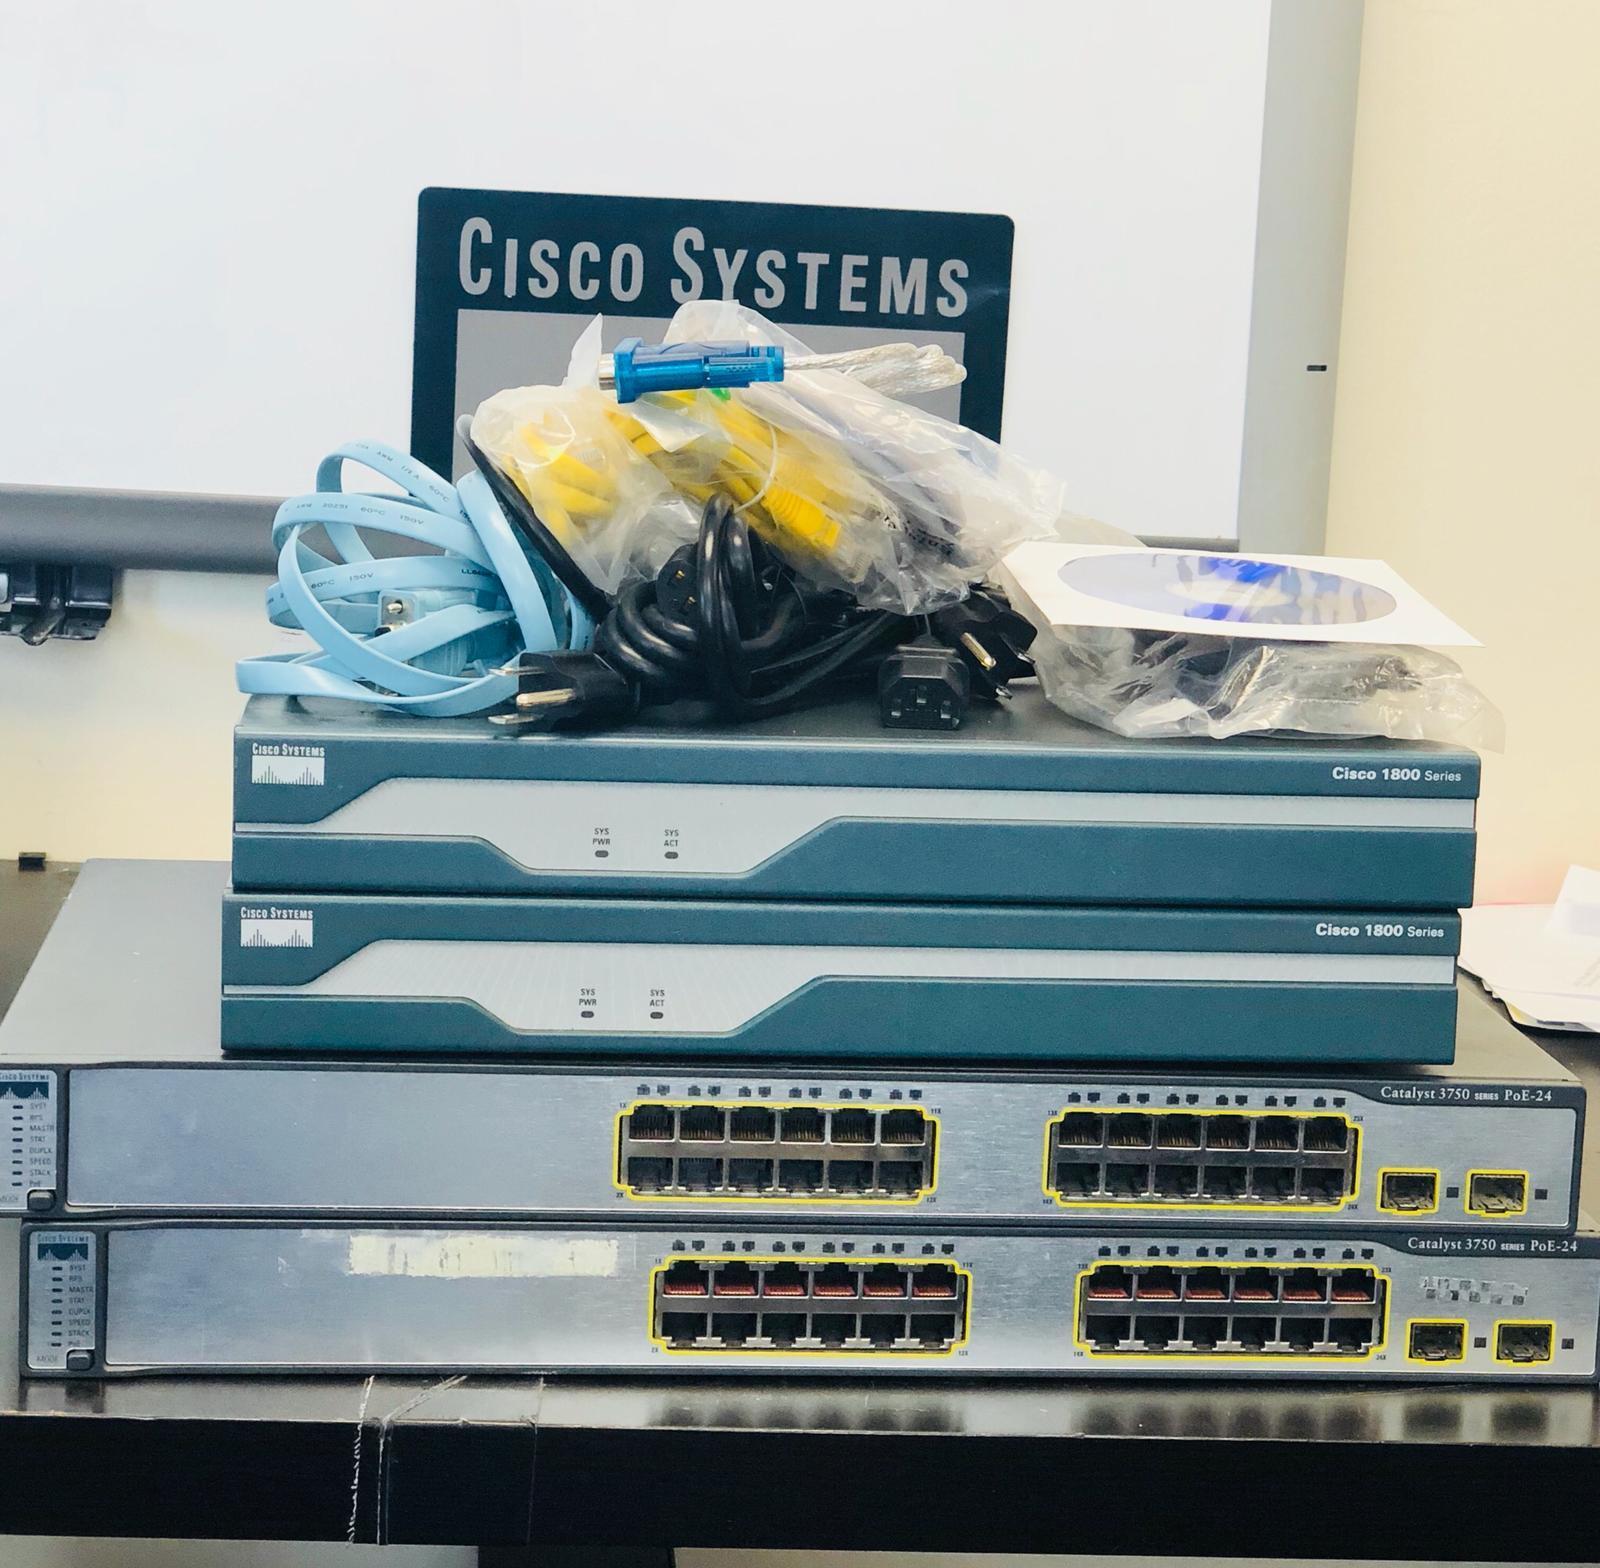 Cisco CCNA and CCNP home lab kit with stack cable